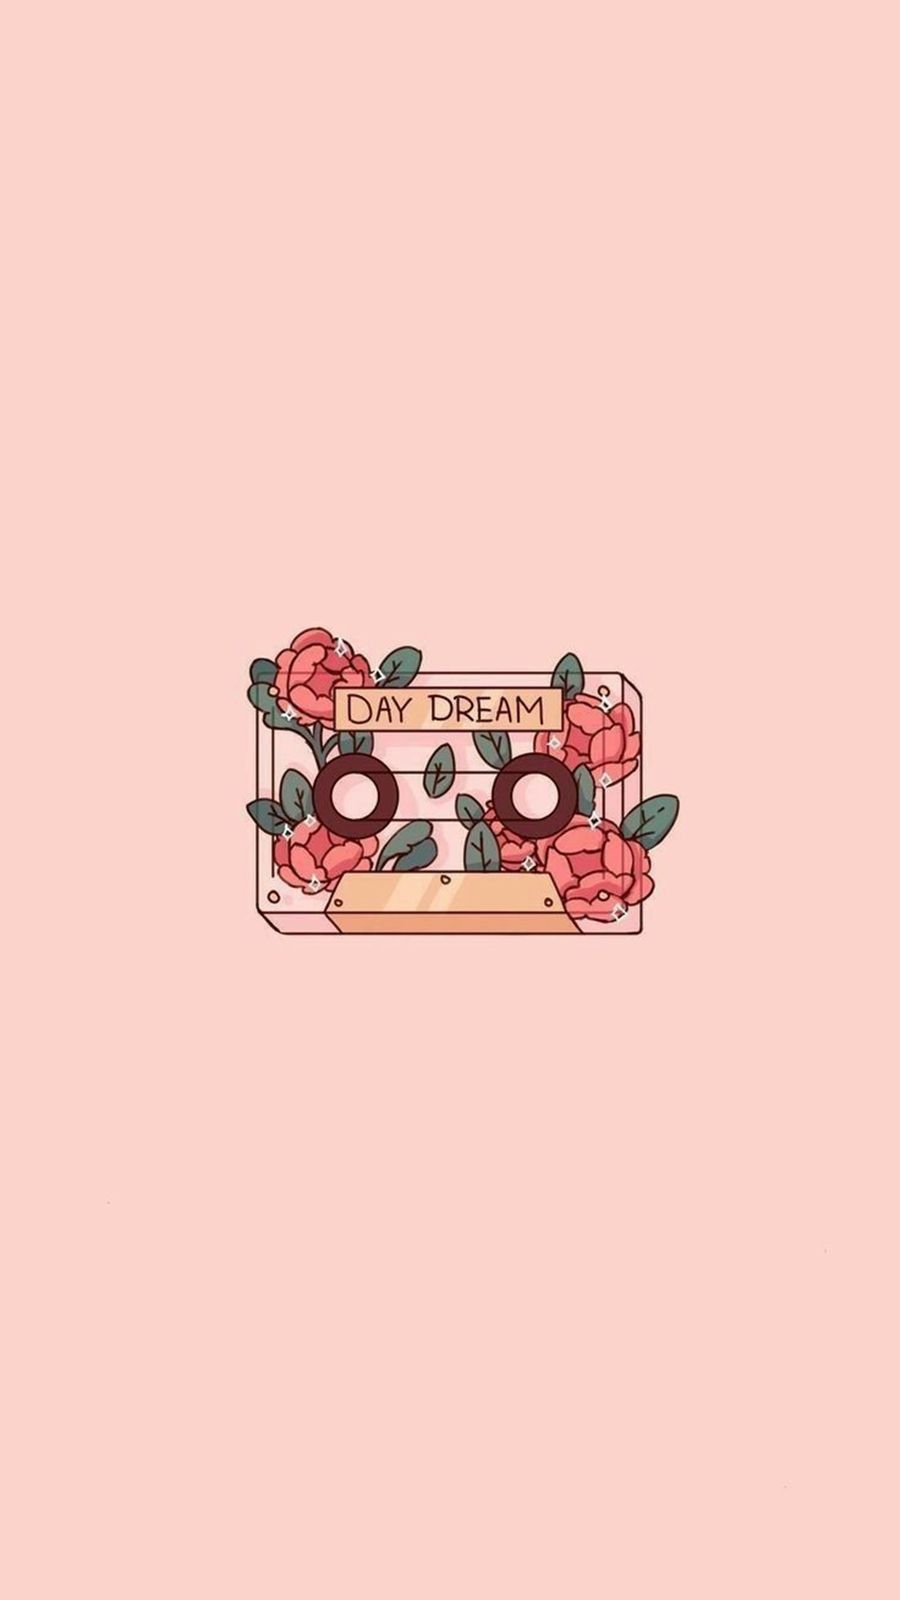 Pink background, drawing of a cassette tape, pink roses, phone background - Music